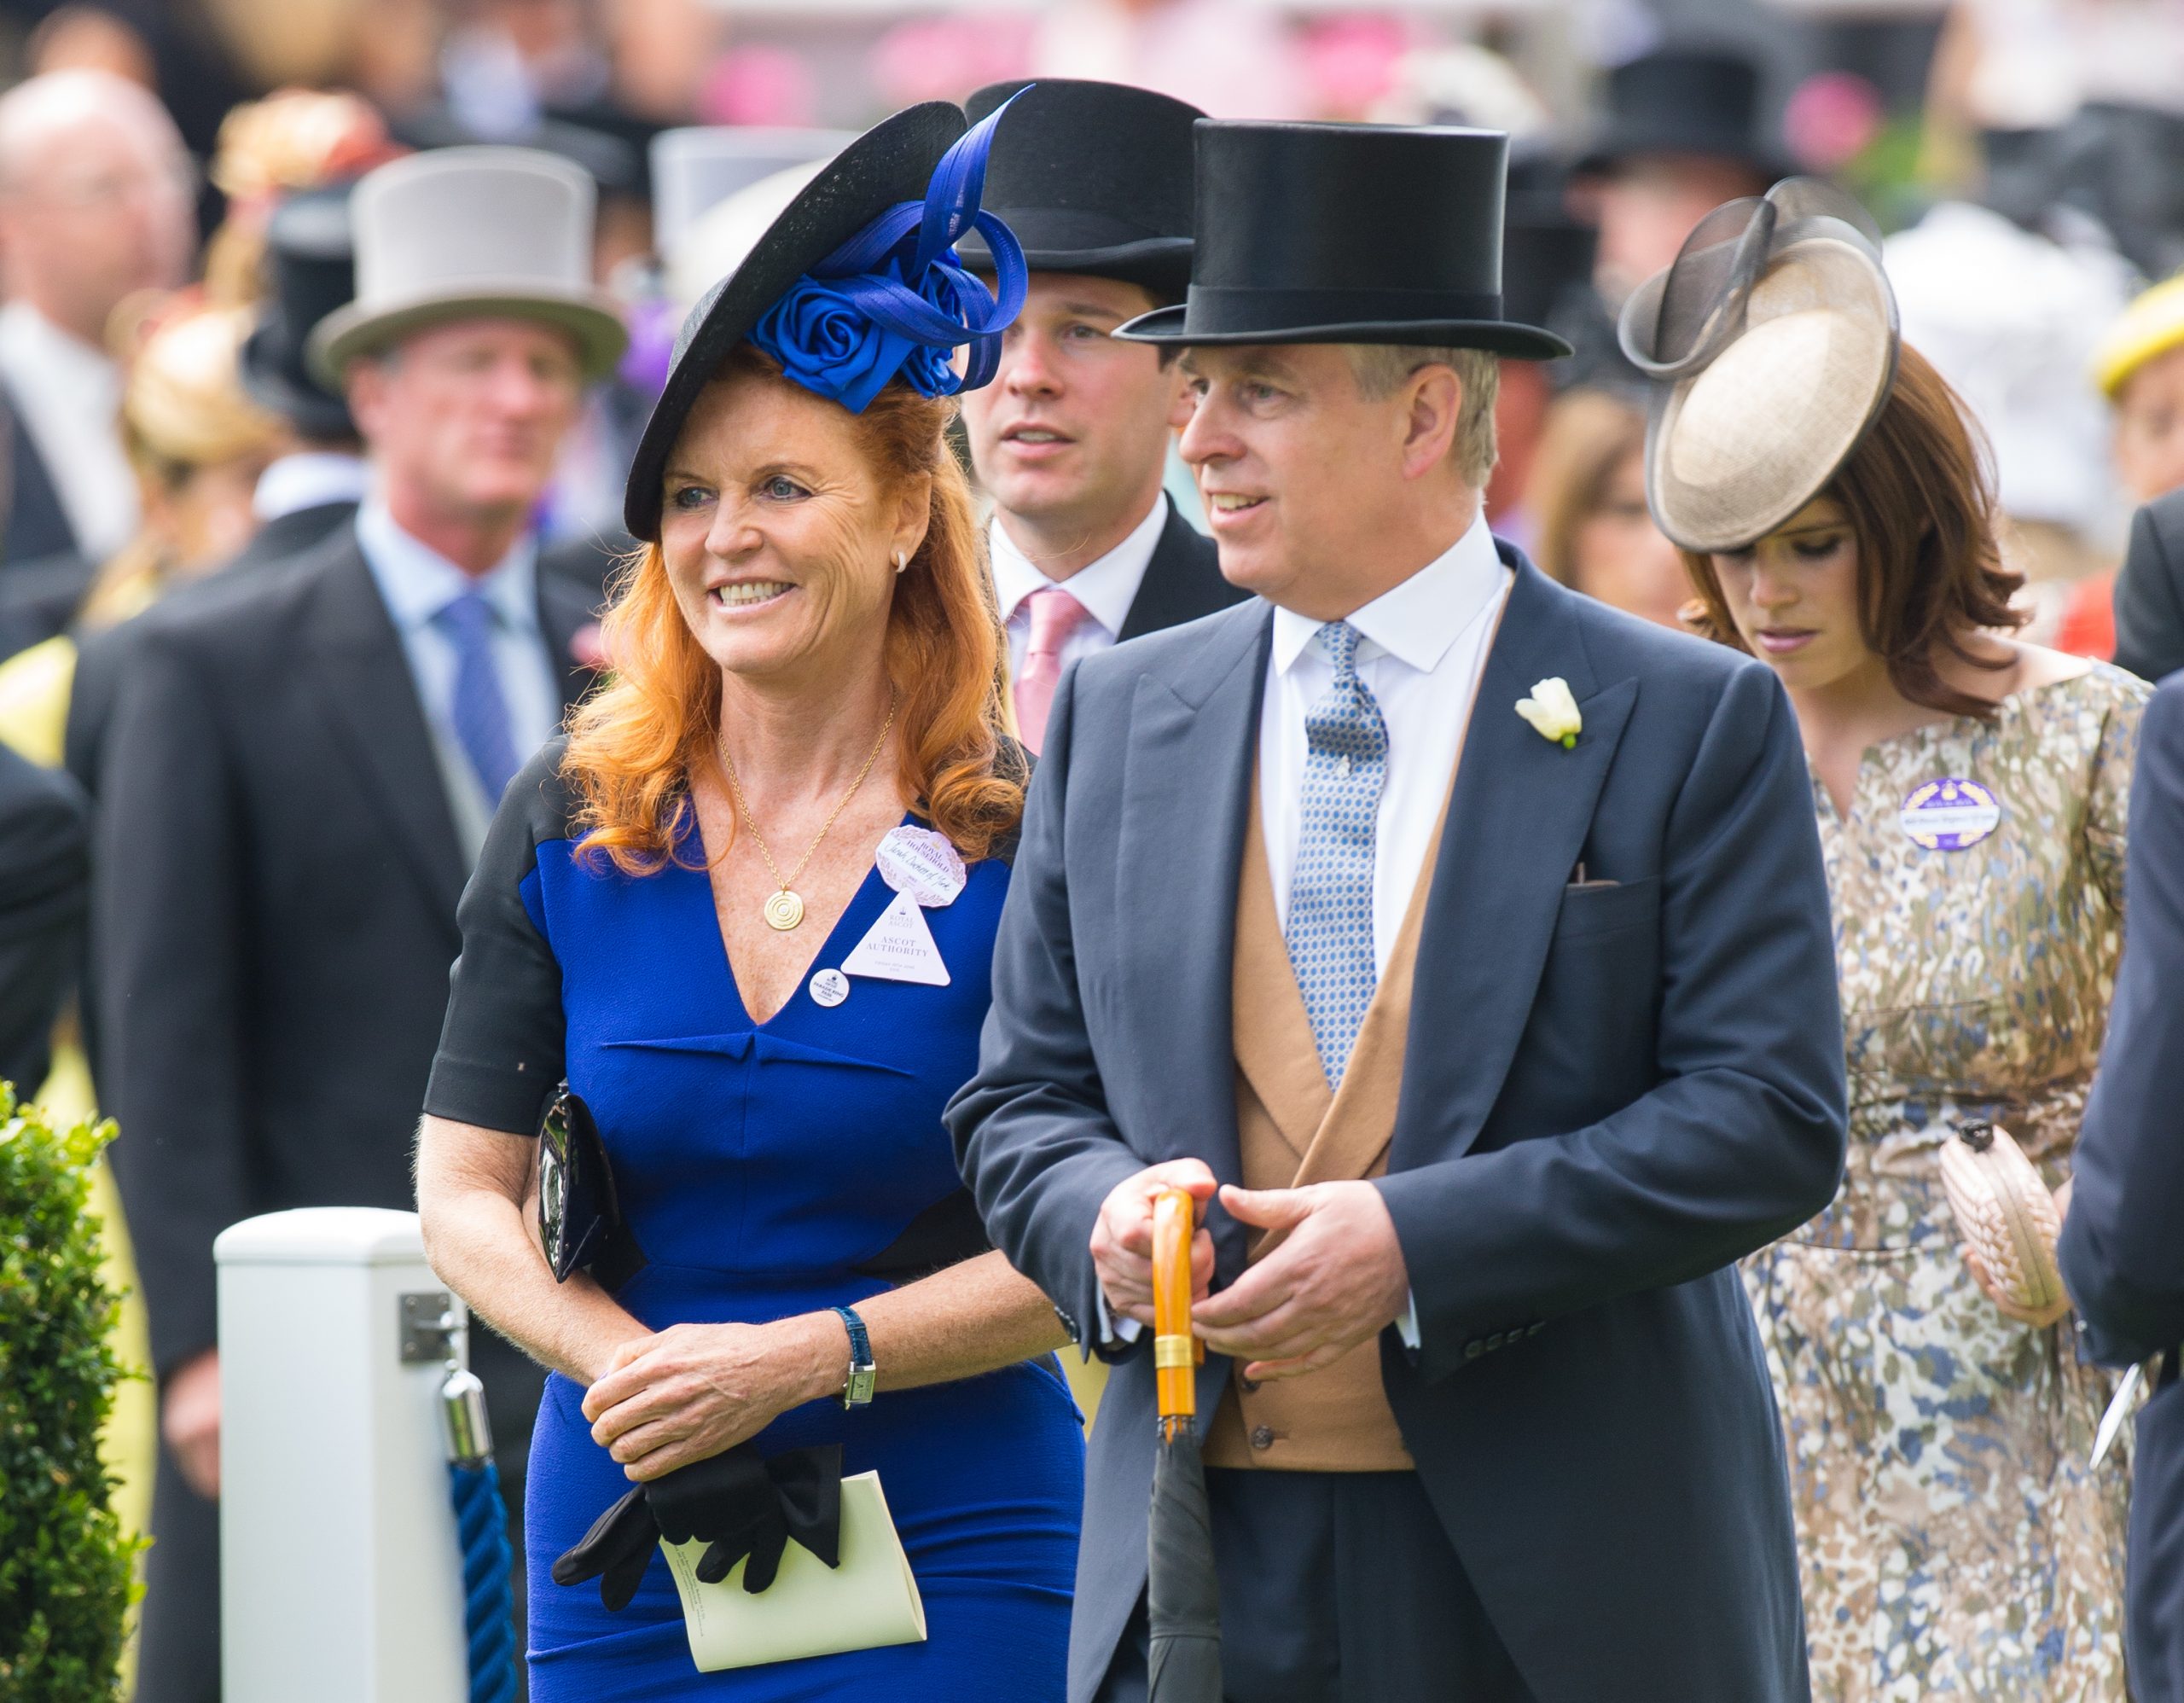 Prince Andrews Wants to Remarry Ex-Wife Sarah Ferguson: Reports 